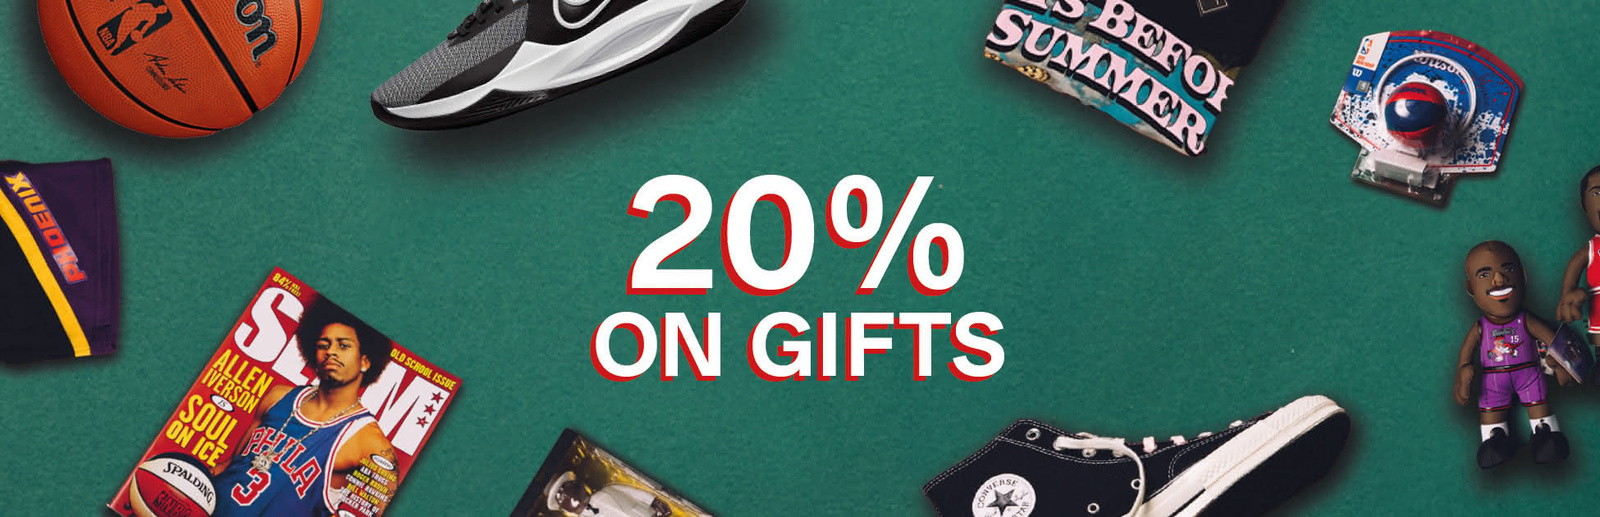 20% ON GIFTS